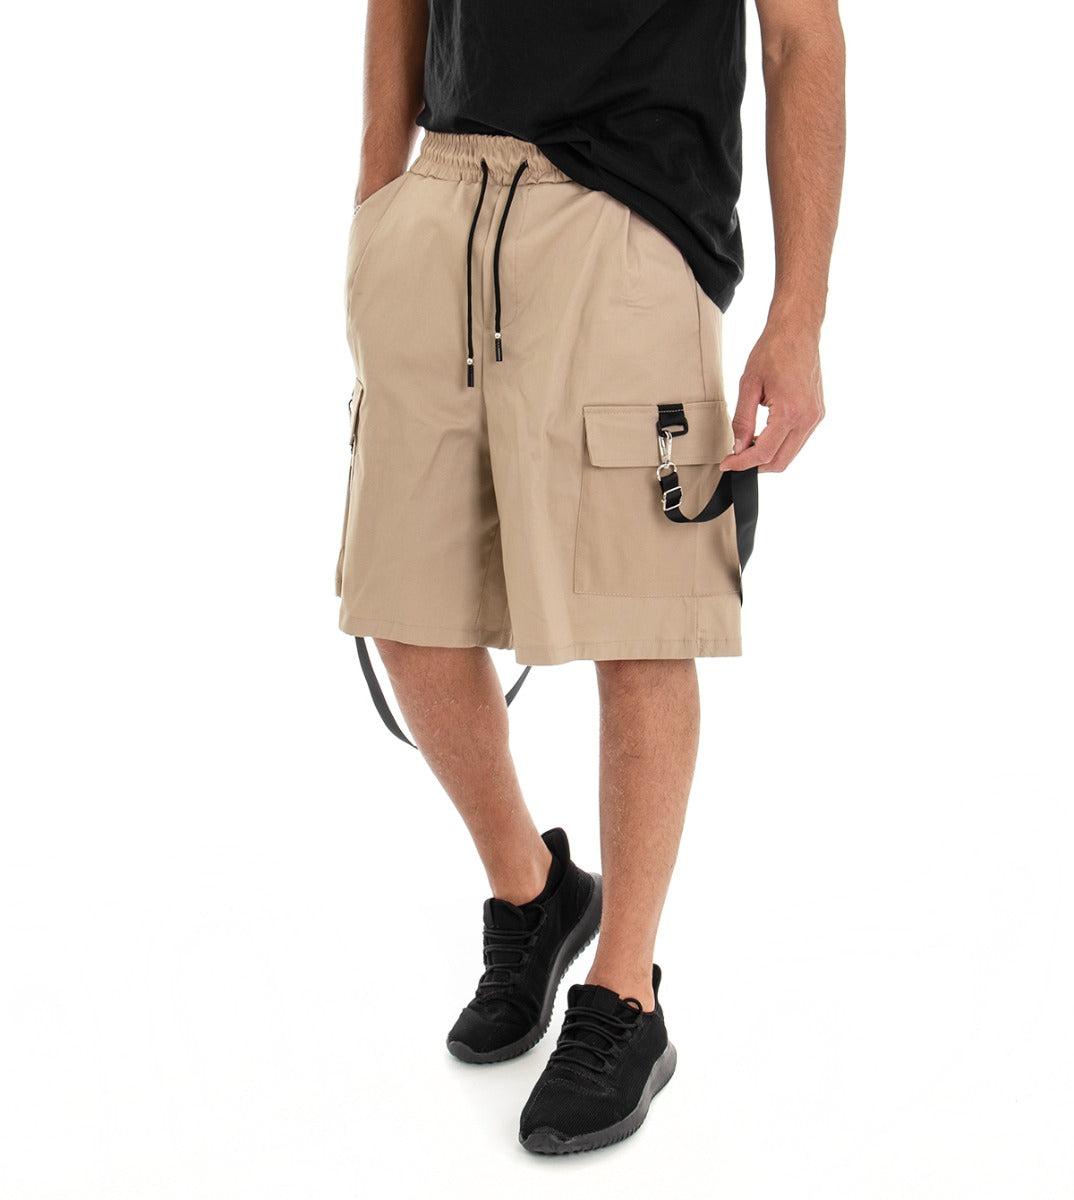 Bermuda Shorts Men's Shorts Solid Color Beige Cargo GIOSAL-PC1555A